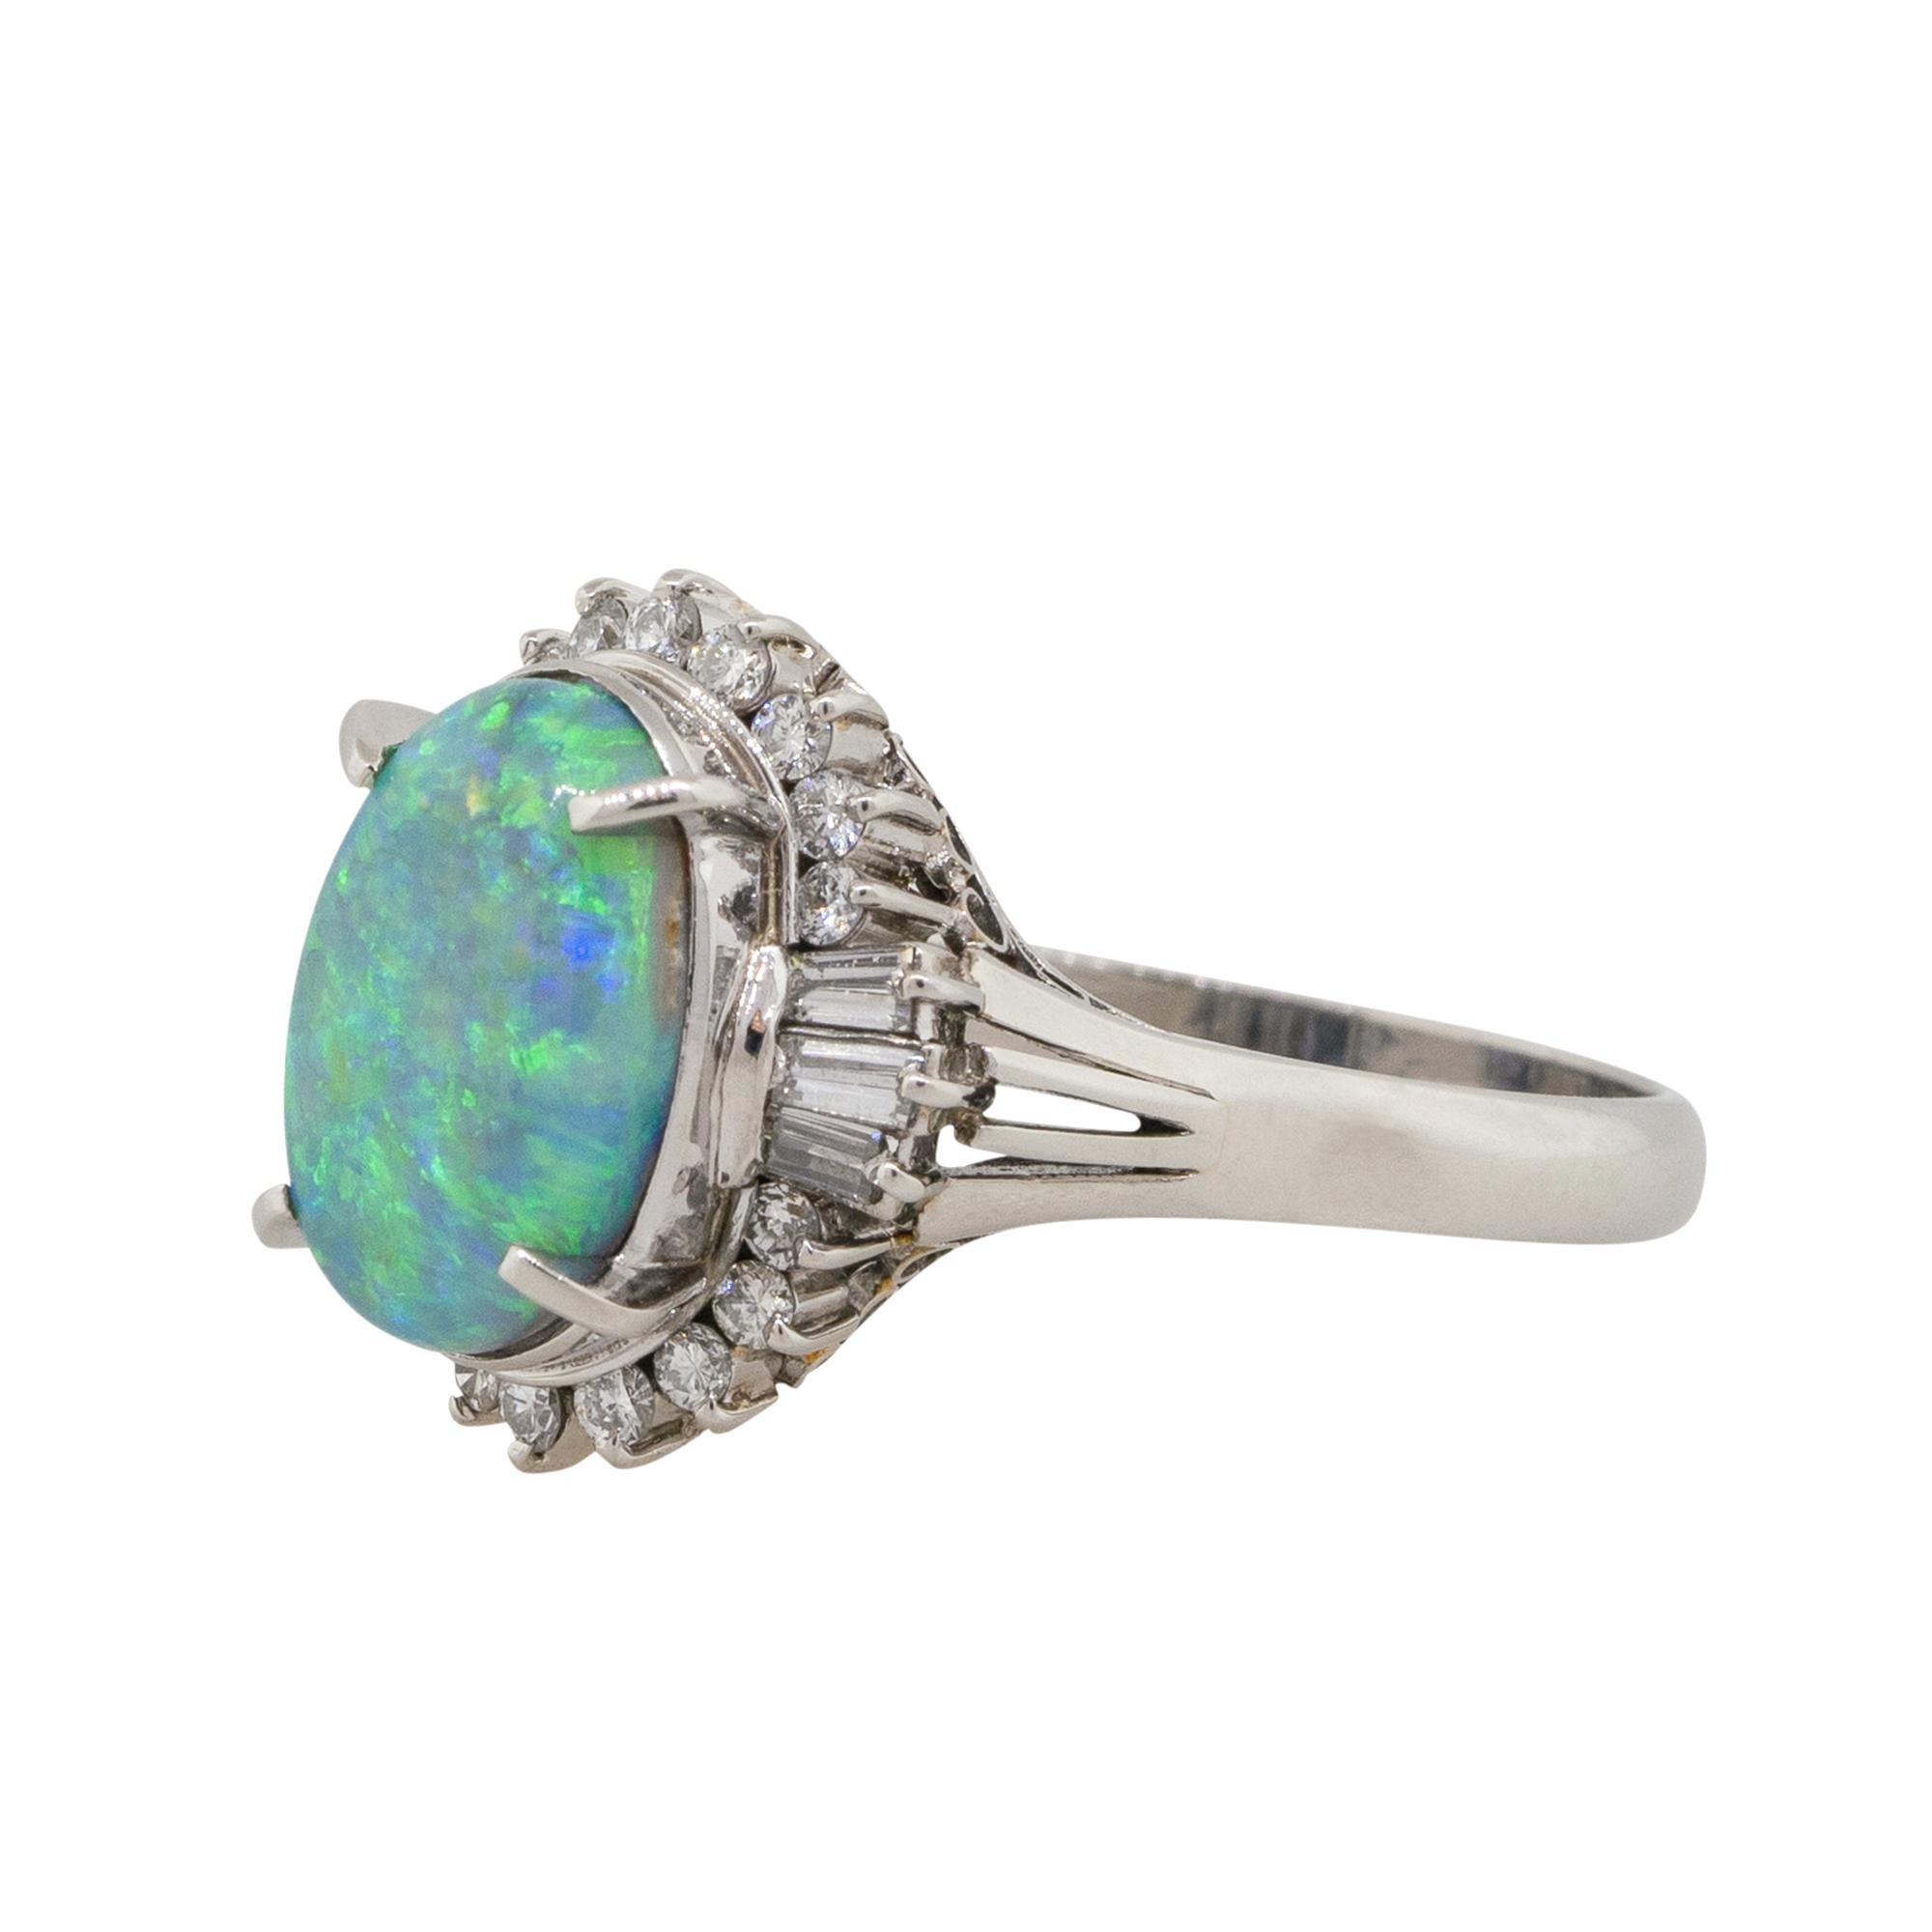 Material: Platinum
Gemstone details: Approx. 2.52ctw Oval shaped Opal center gemstone
Diamond details: Approx. 0.48ctw of Round cut Diamonds. Diamonds are G/H in color and VS in clarity
Ring Size: 8.25 
Ring Measurements: 0.75